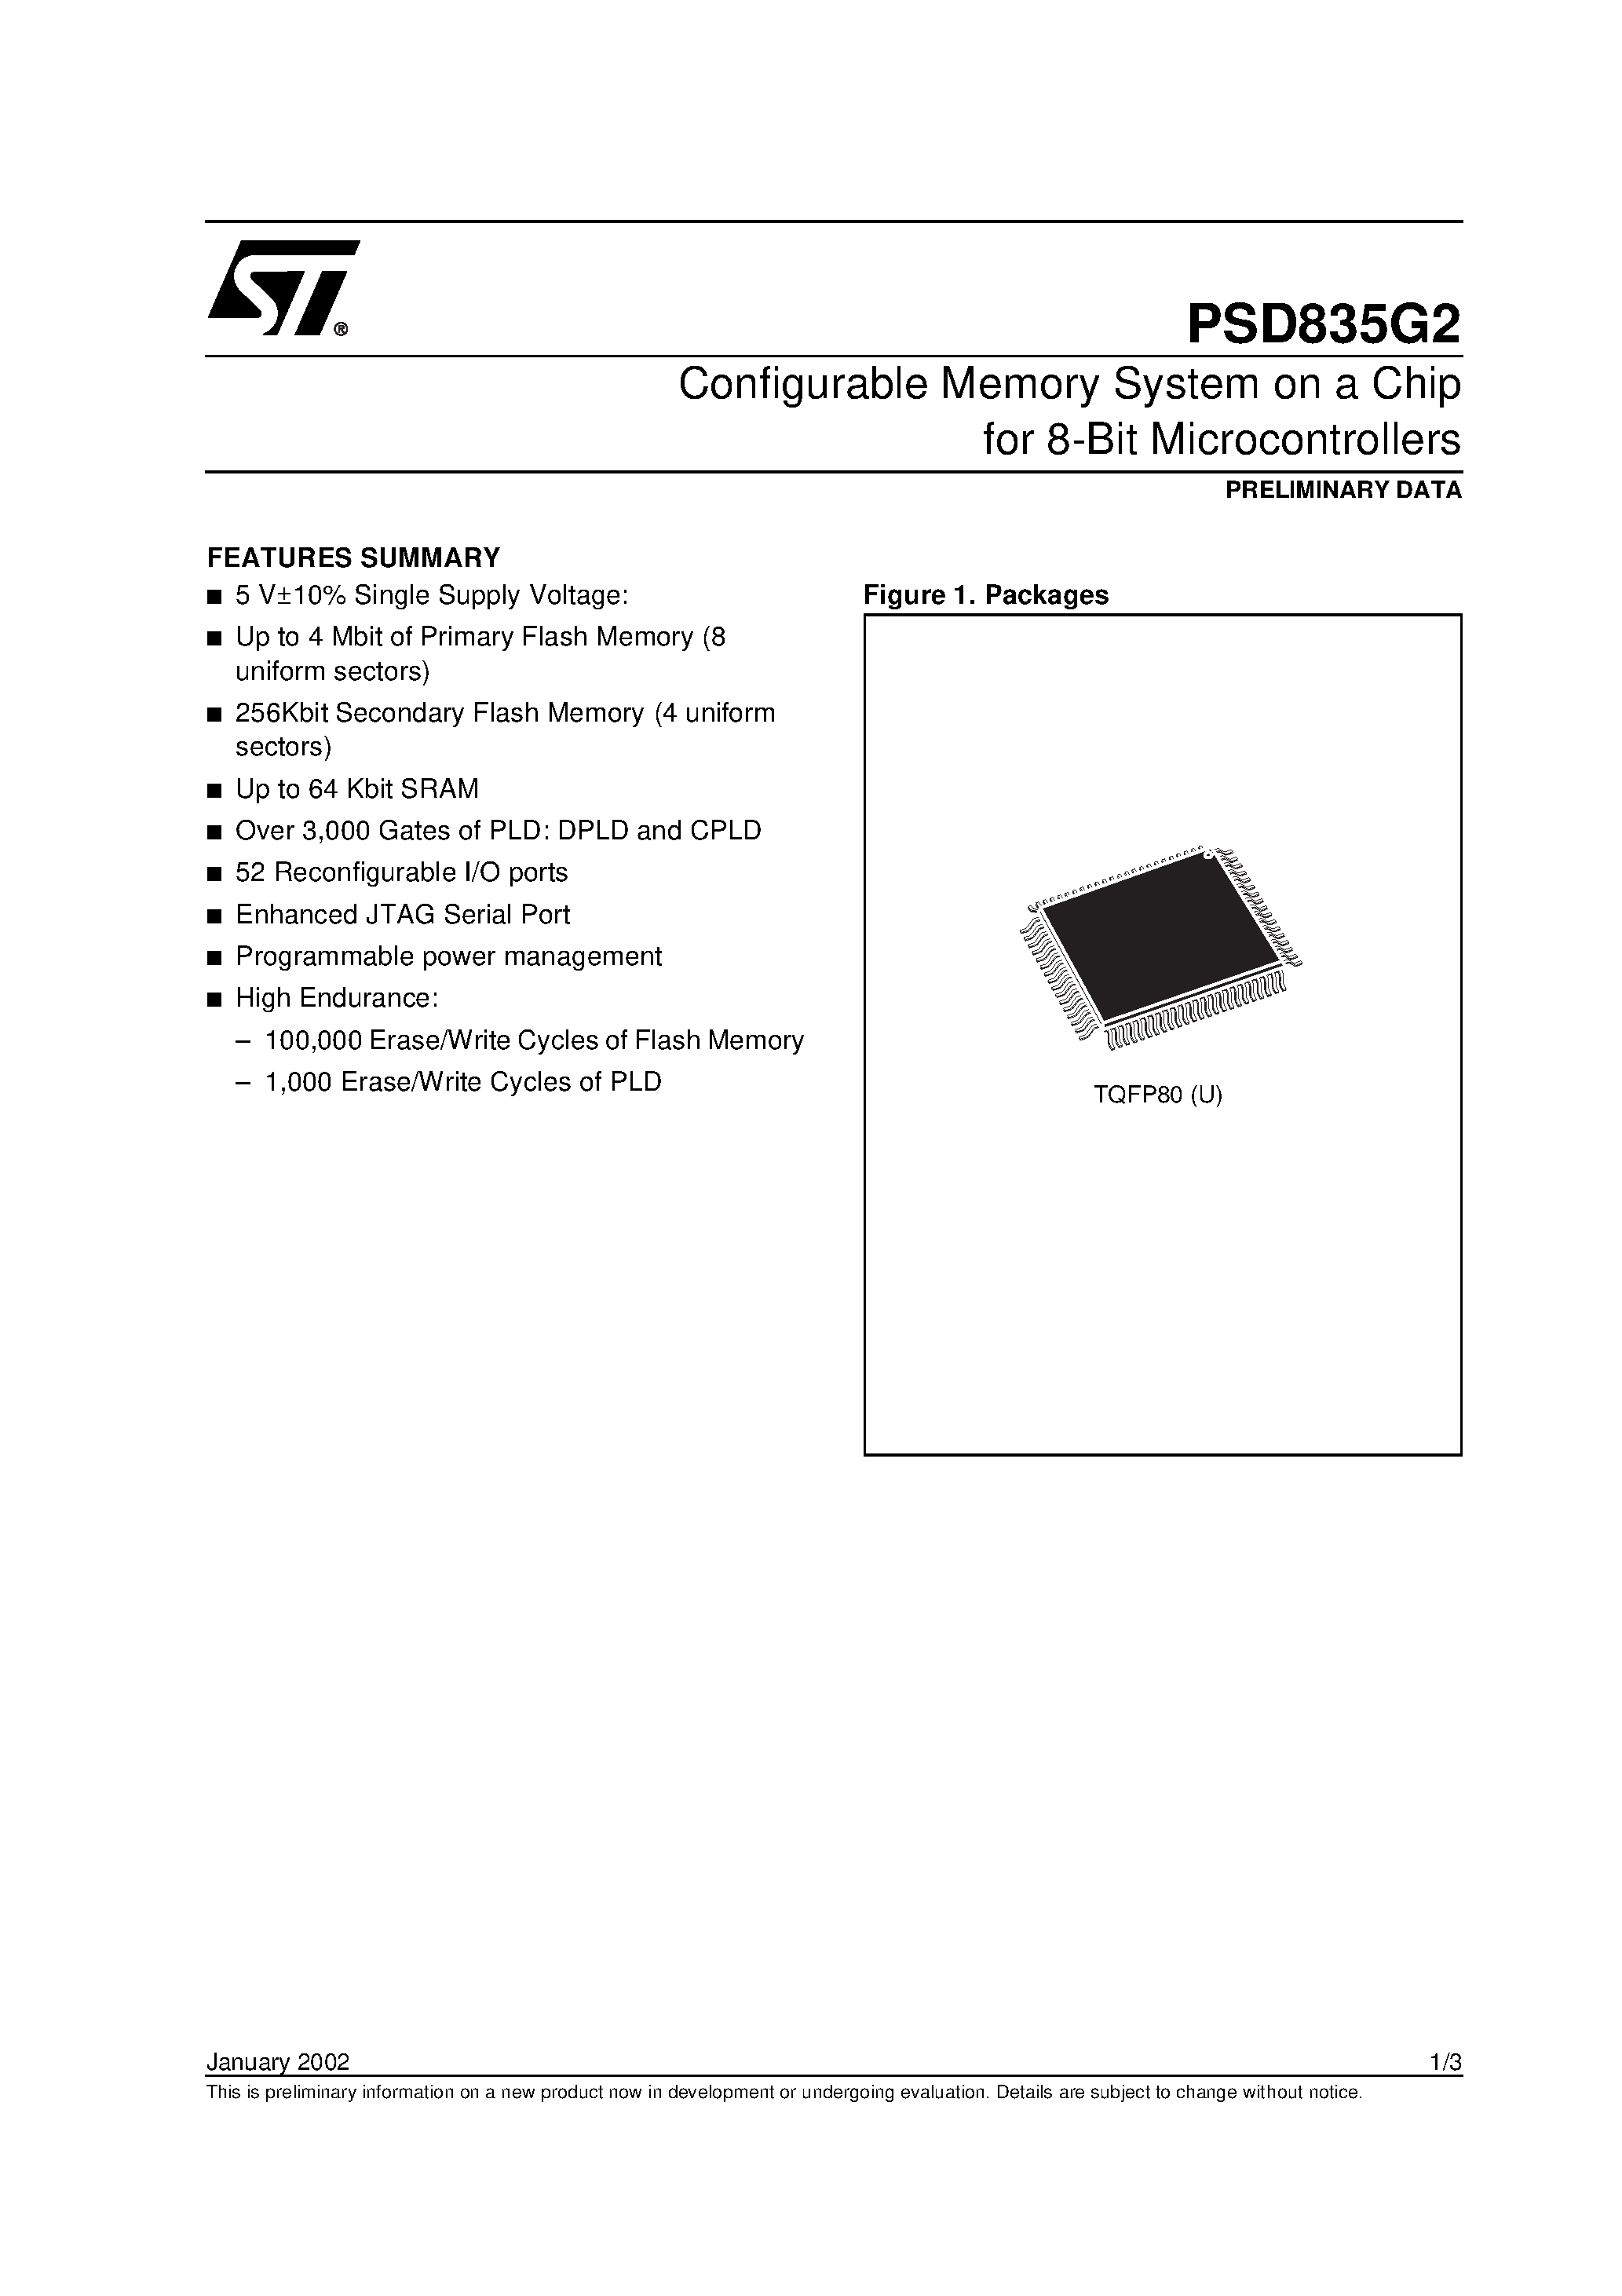 Datasheet PSD835F1V-A-20U - Configurable Memory System on a Chip for 8-Bit Microcontrollers page 1